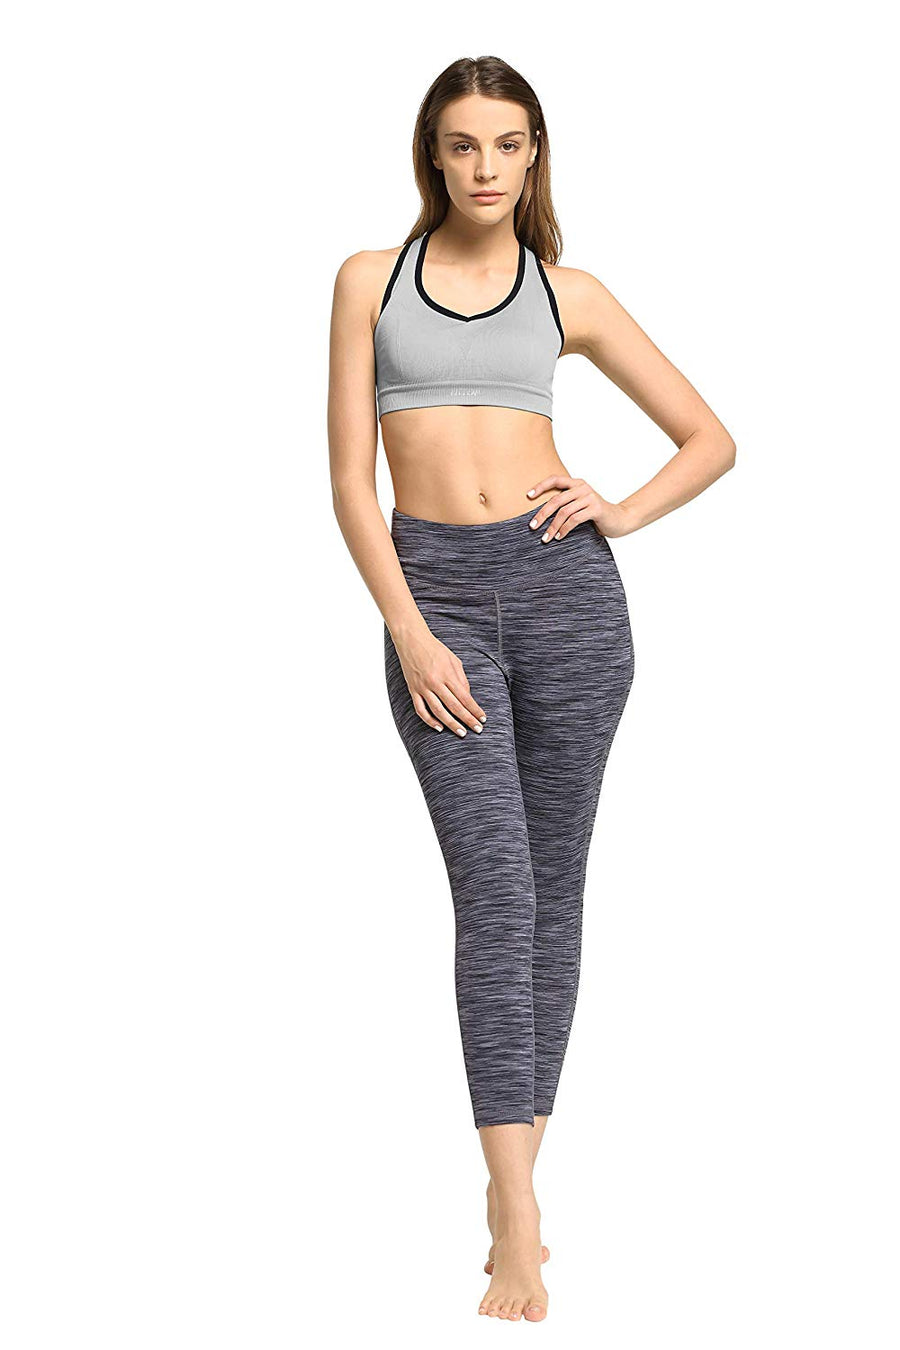 CYZ Women's Space-Dyed Tummy Control Yoga Workout Leggings with Cell Phone Pocket